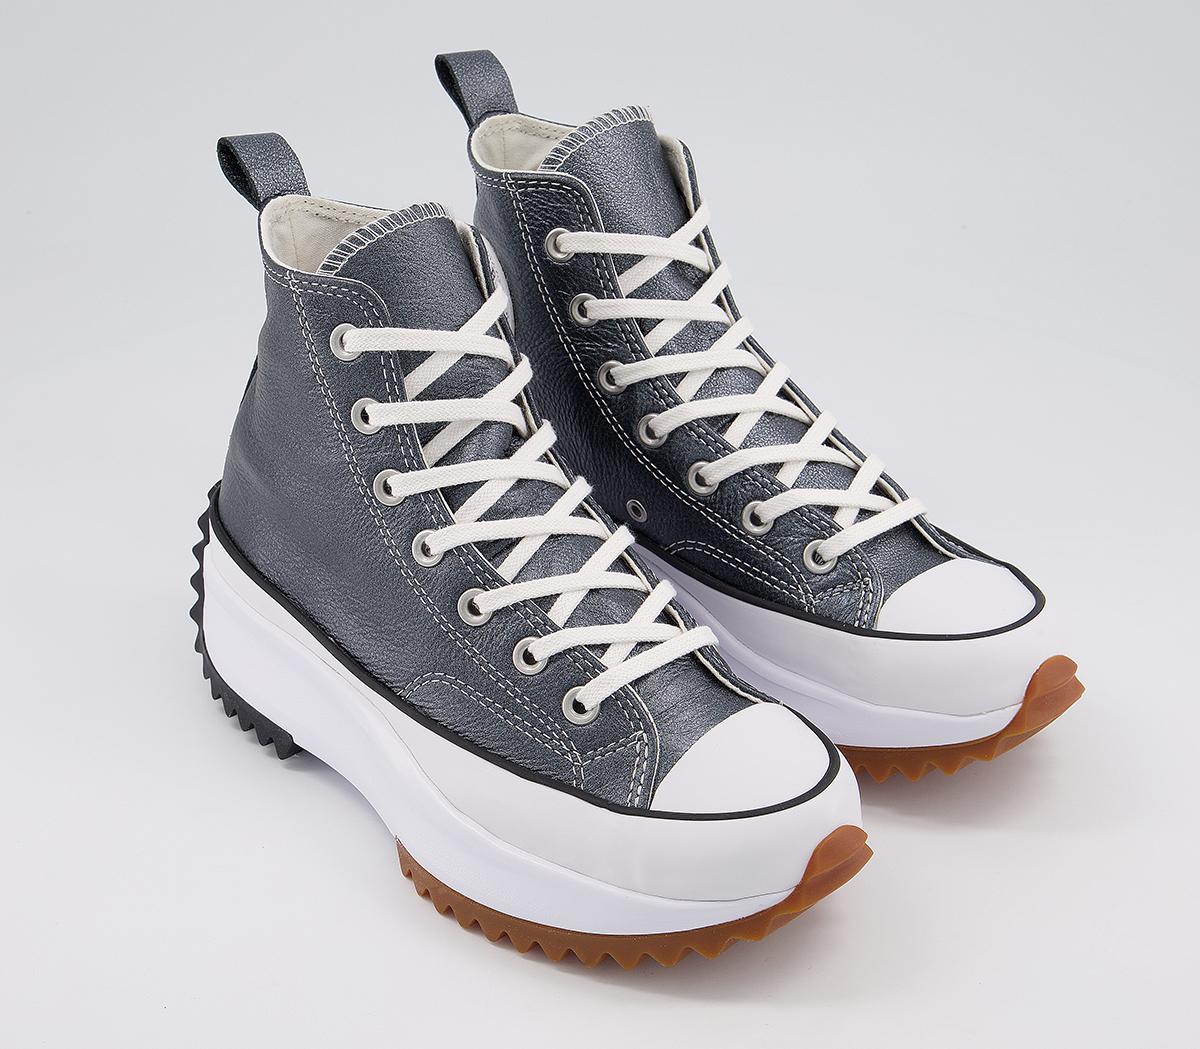 Converse Run Star Hike Trainers Egret Pearl Leather White Black - His ...